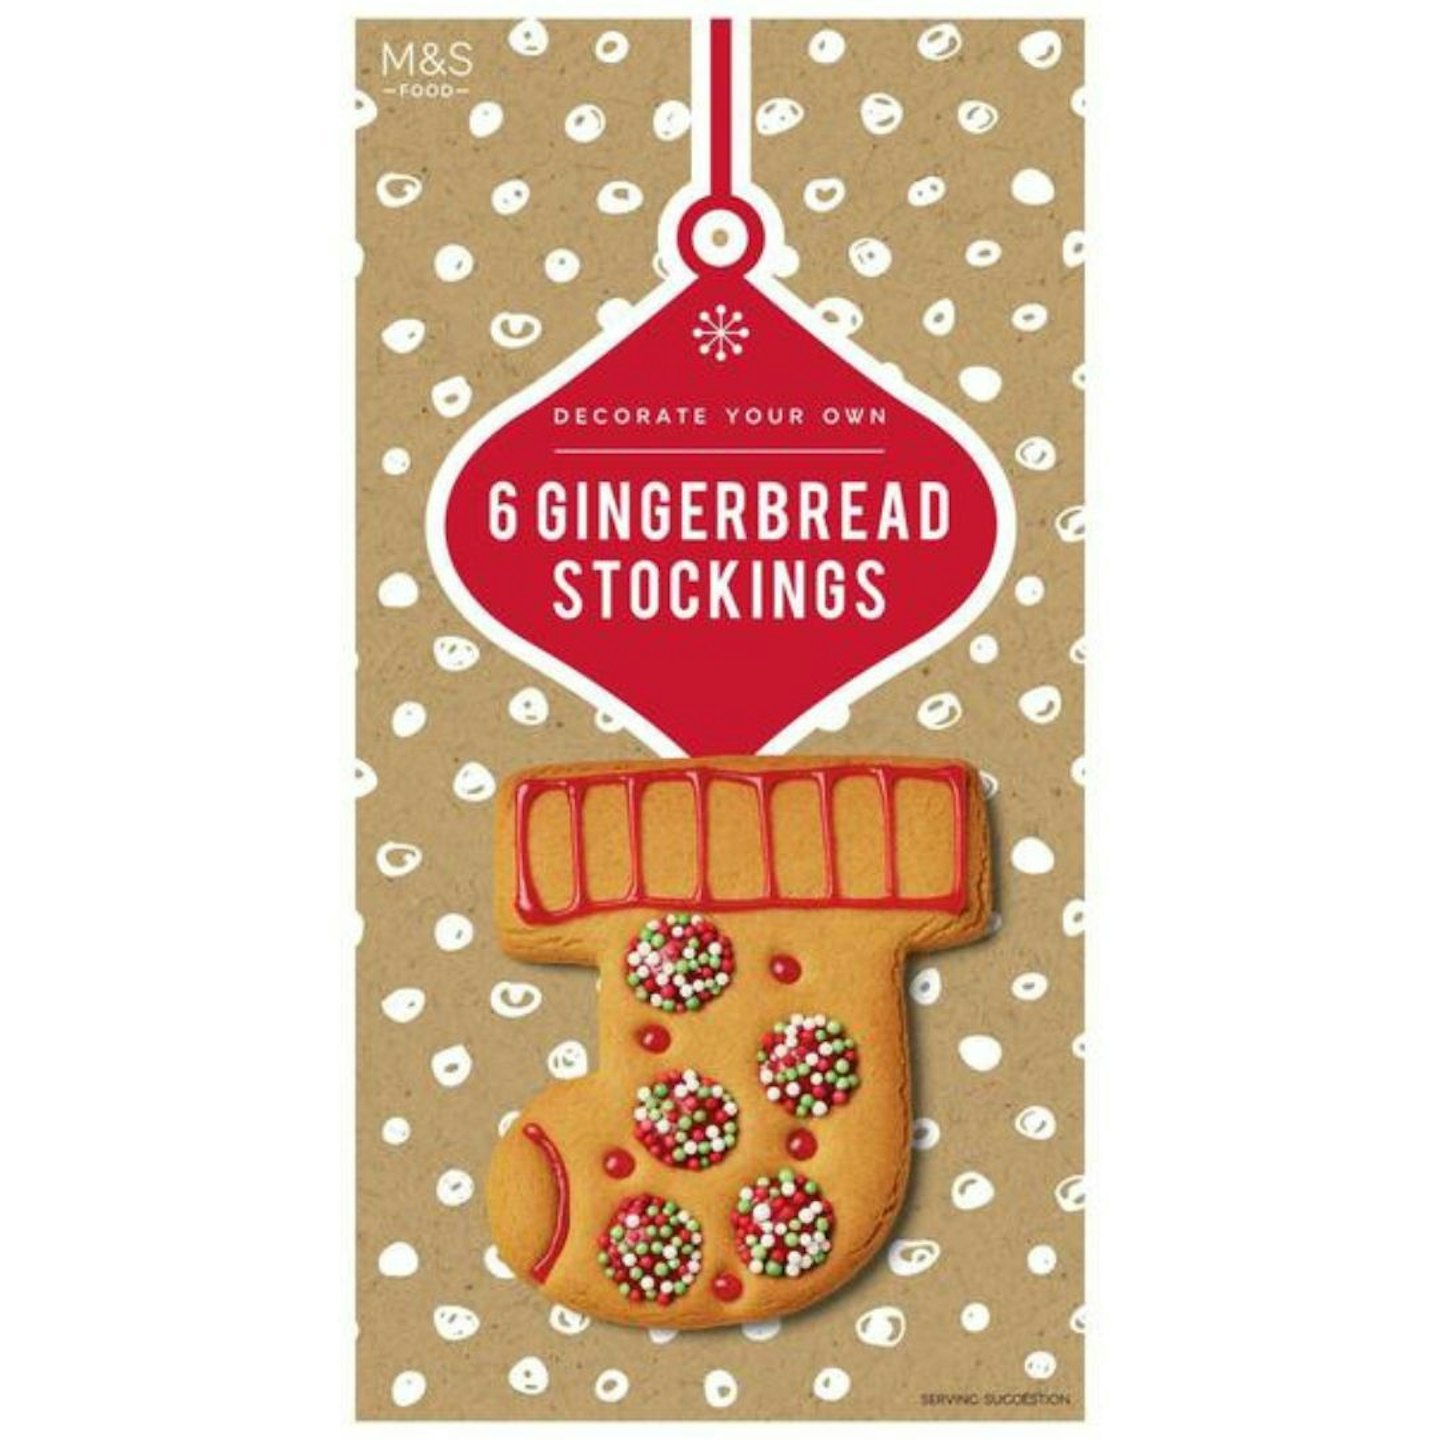 The best cookie decorating kits: M&S Decorate Your Own Gingerbread Stockings 